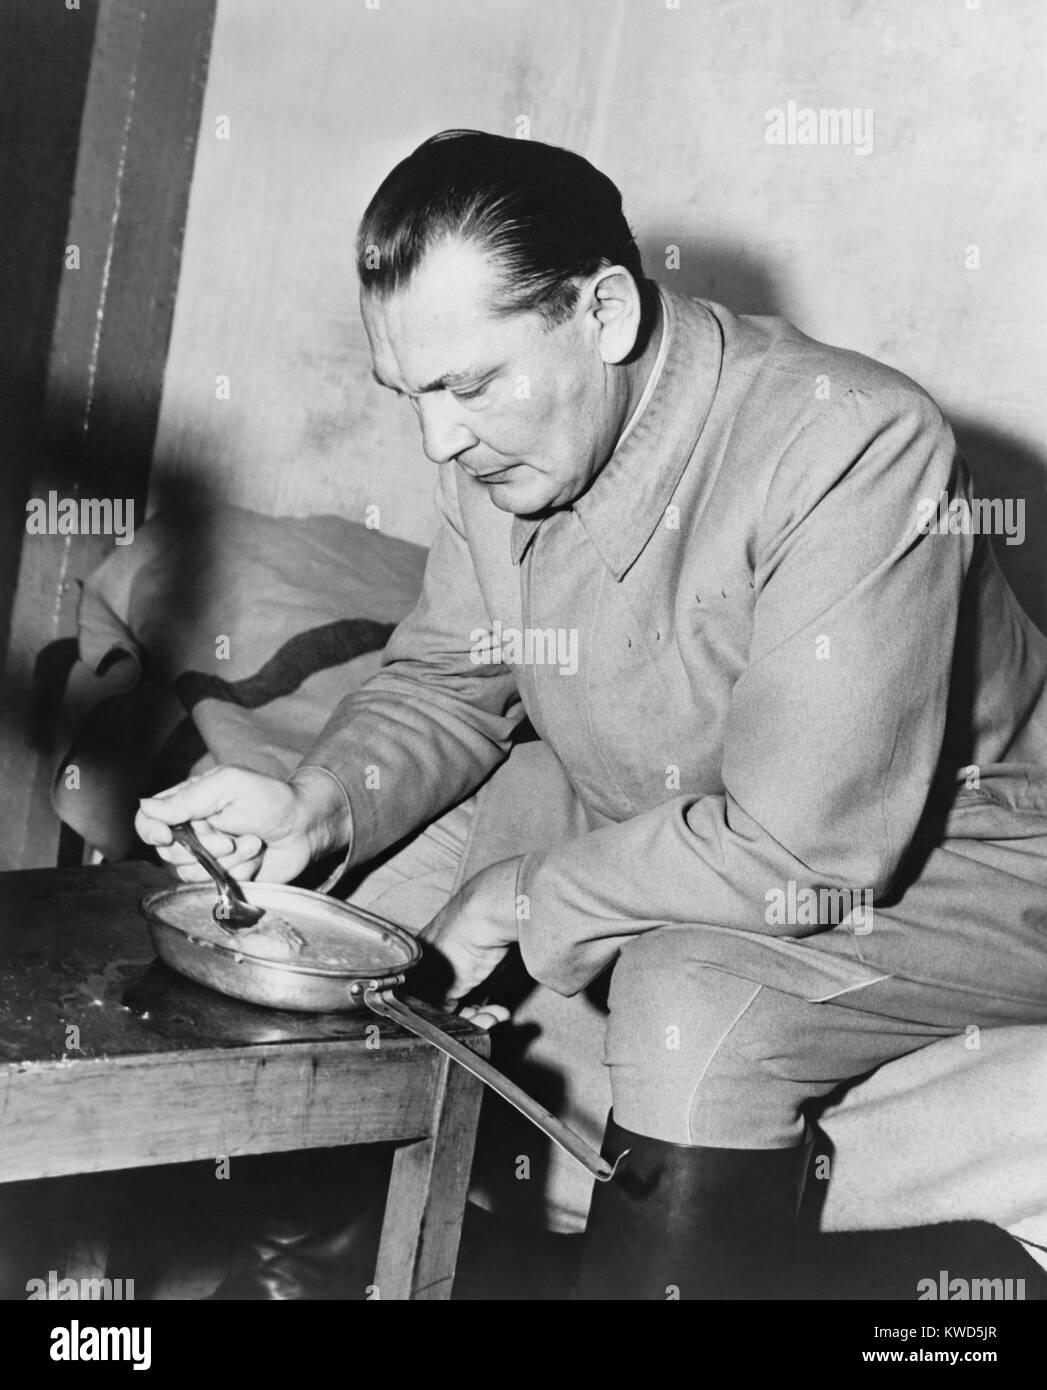 War criminal Hermann Goering eating gruel from a metal pan in prison. He was the highest ranking Nazi to be convicted at the Nuremberg Trials. Nov. 1945-Oct. 1946. (BSLOC 2014 13 2) Stock Photo